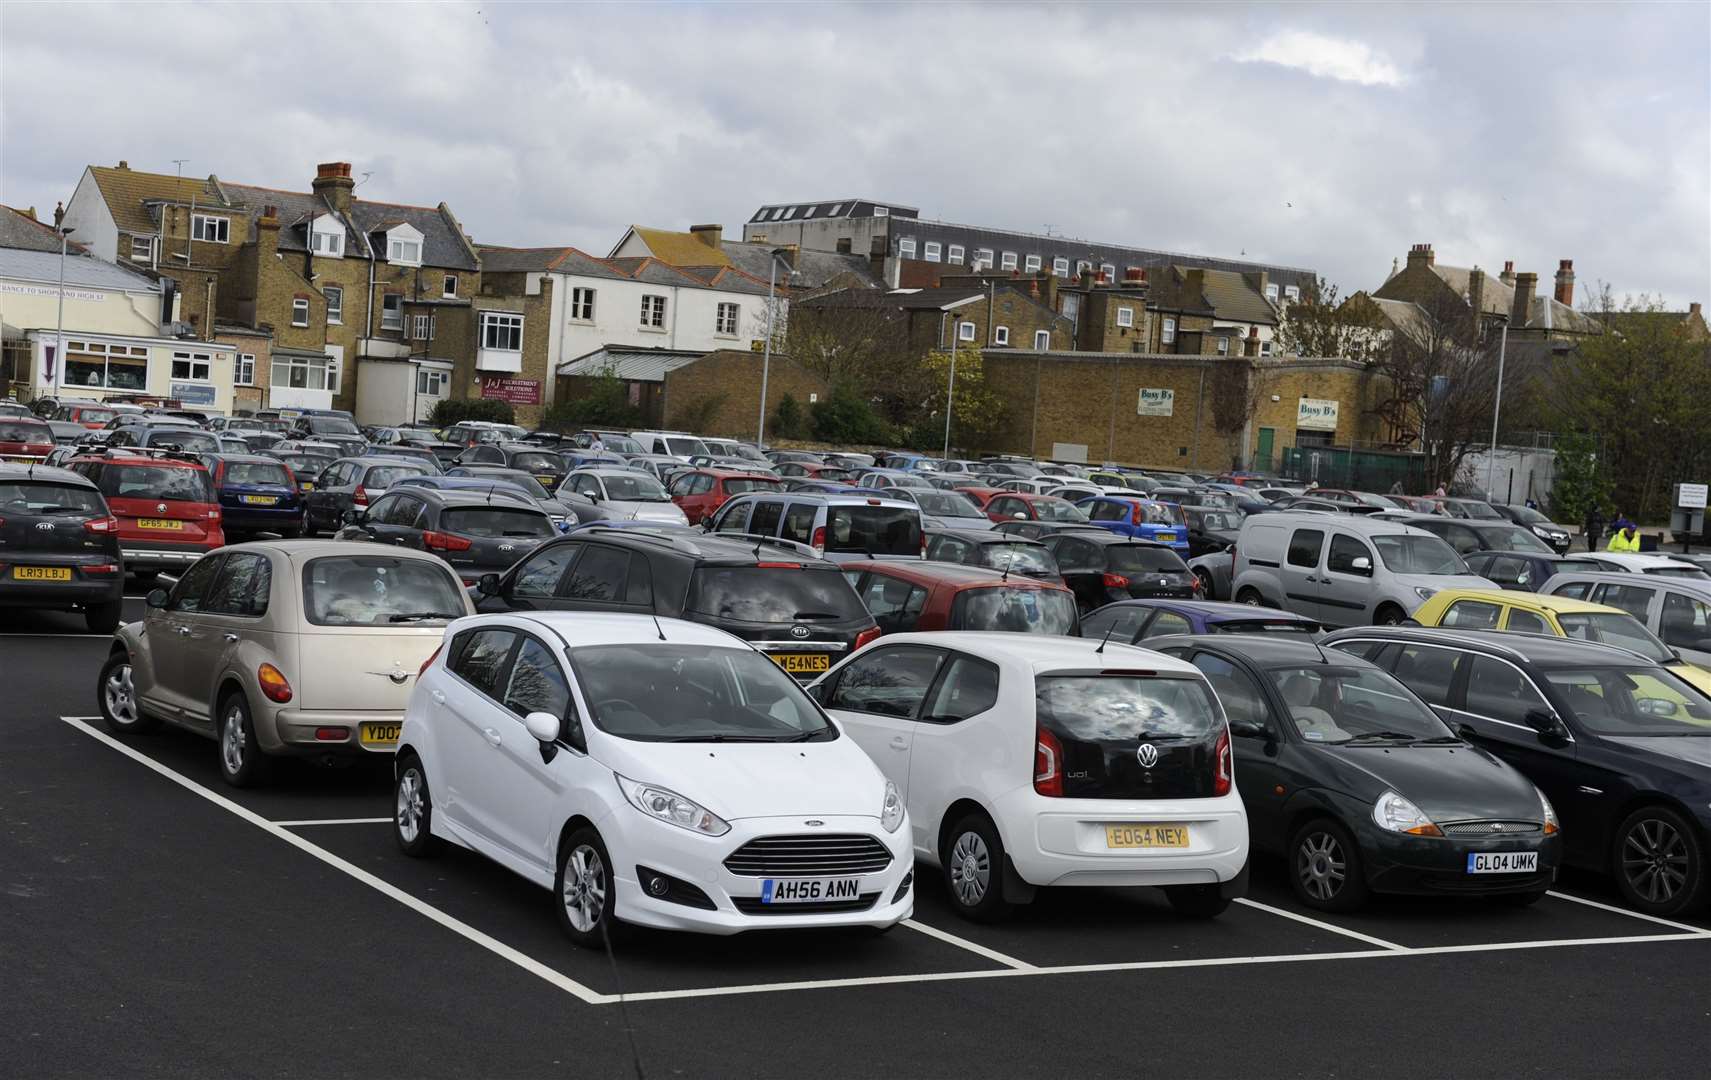 Free evening parking in William Street car park in Herne Bay could soon be scrapped